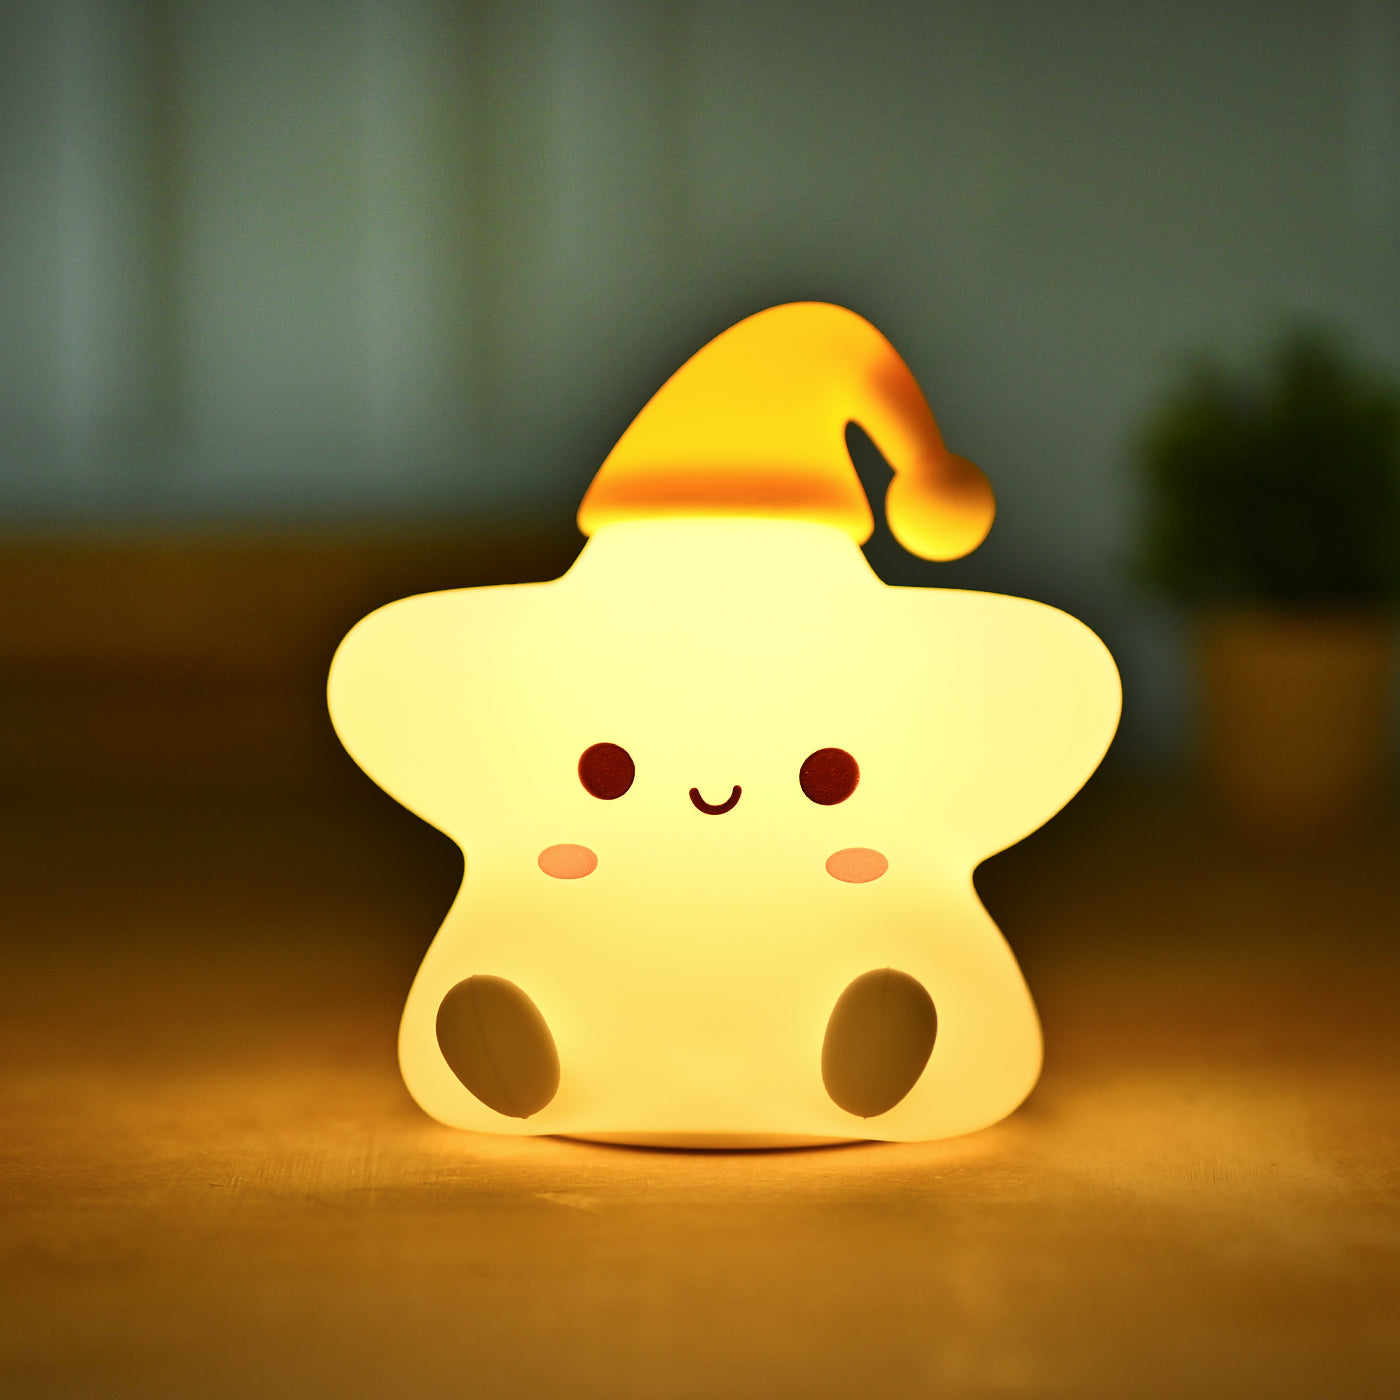 Silicone Cute Little Star Night Lamp for children | Bedroom | Christmas Gift | Tap Lamp | Multiple Colors